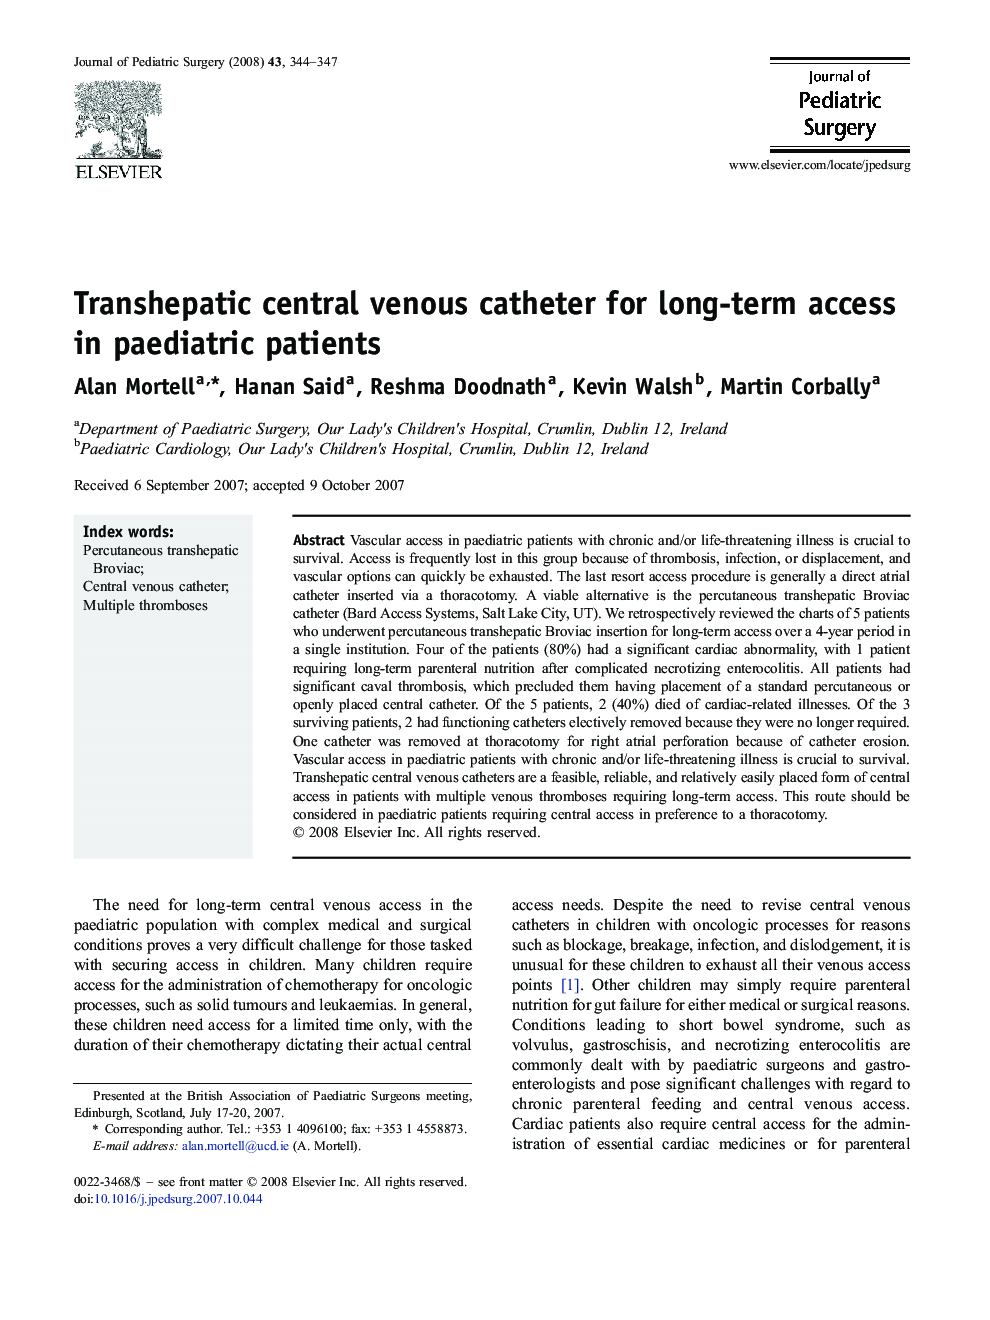 Transhepatic central venous catheter for long-term access in paediatric patients 